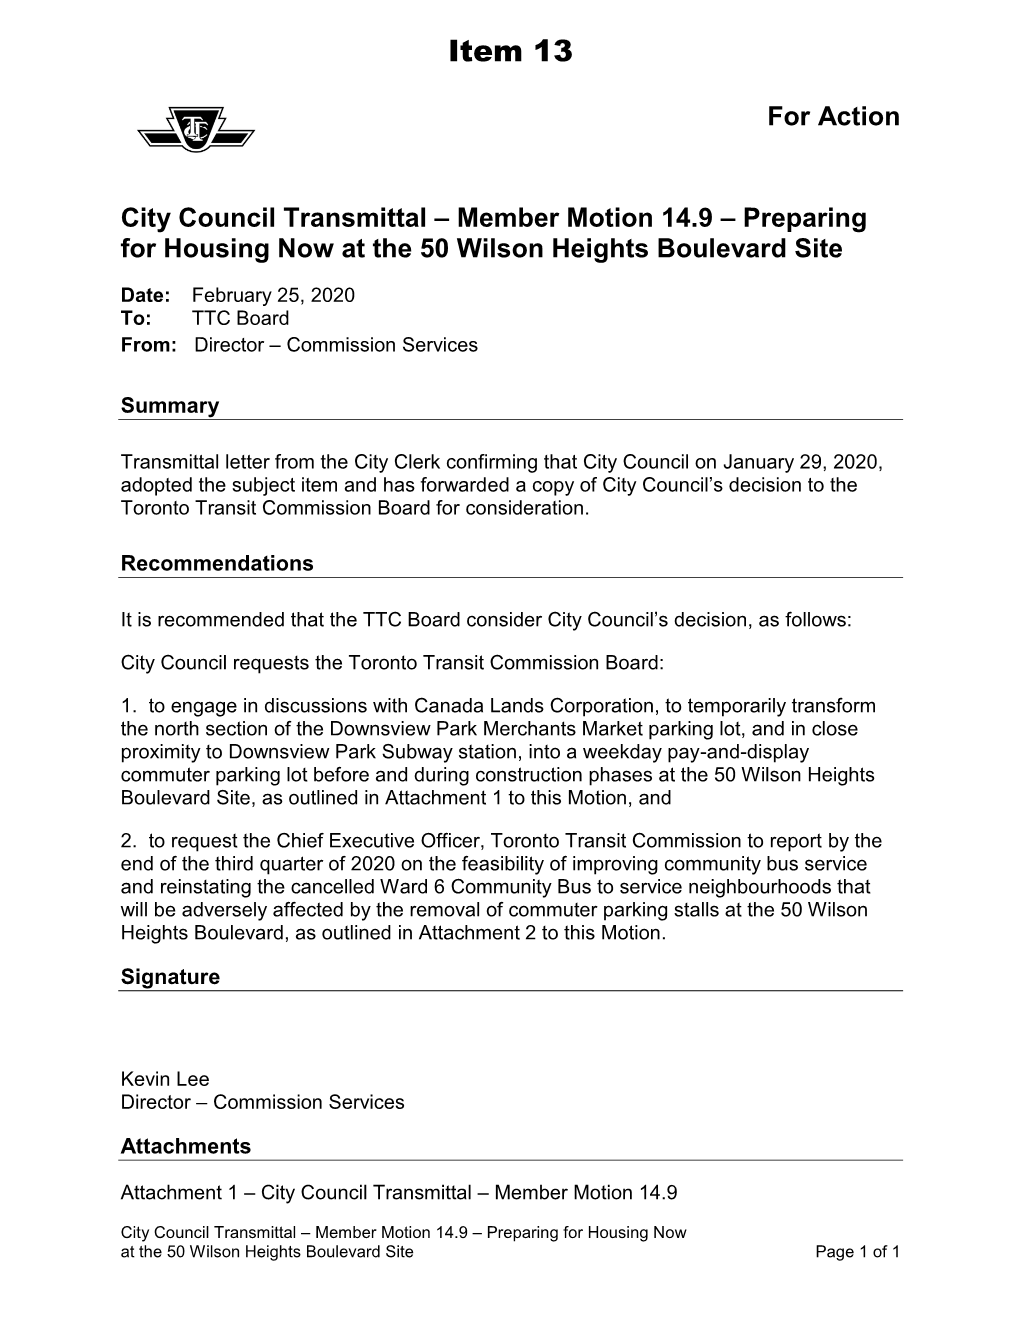 City Council Transmittal – Member Motion 14.9: Preparing for Housing Now at the 50 Wilson Heights Boulevard